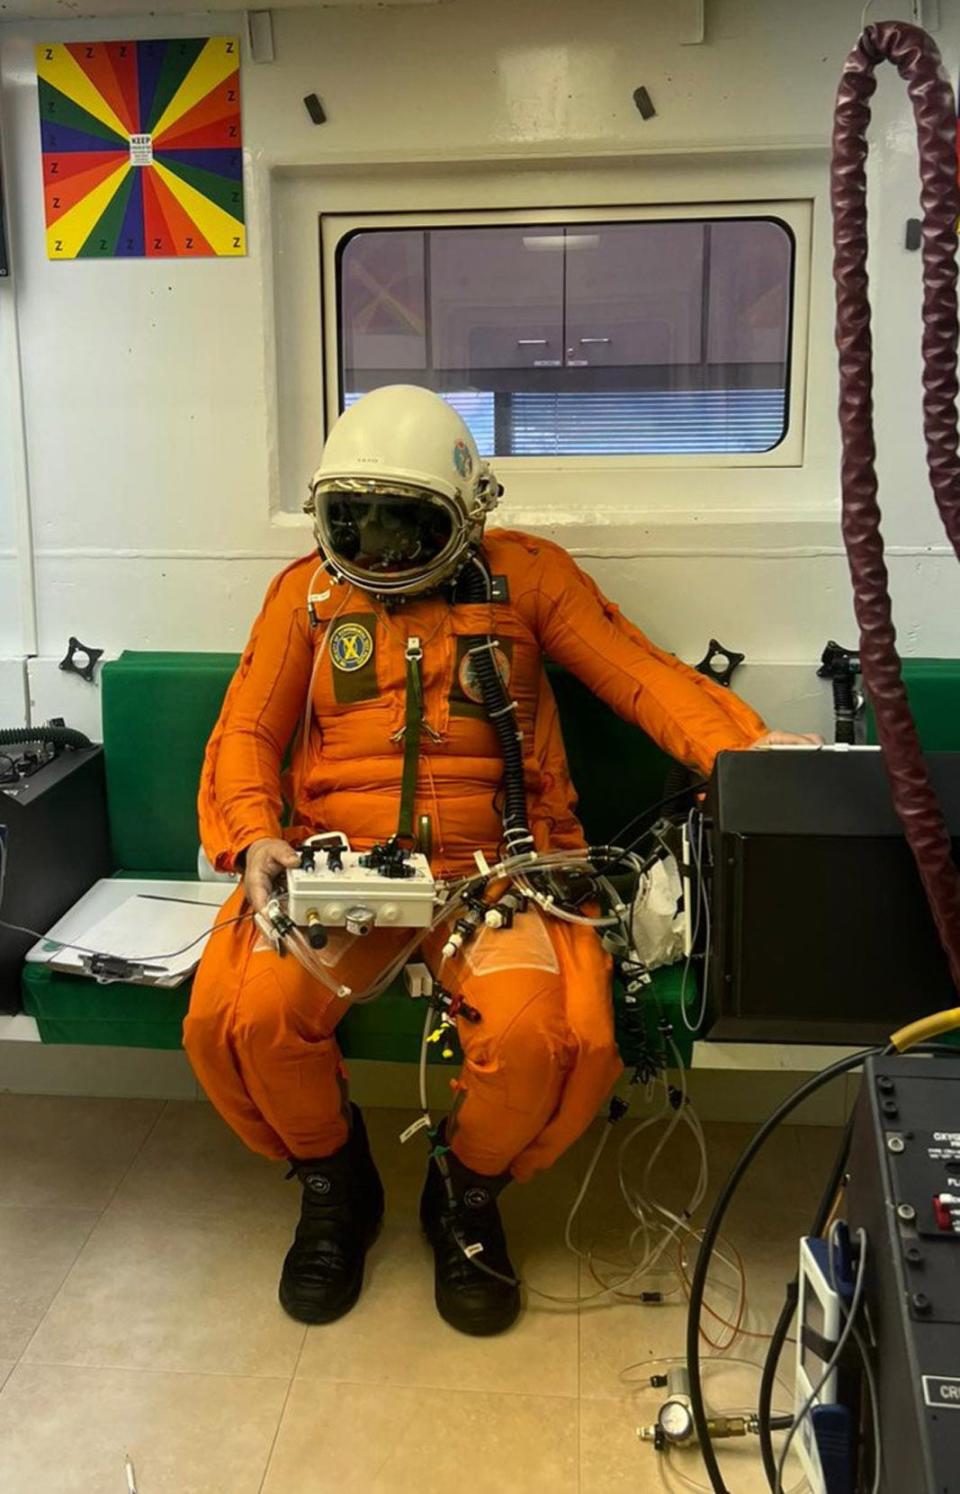 Miguel Iturmendi tests his partial pressure suit on Nov. 8., inside the altitude chamber at the John D. Odegard School of Aerospace Sciences at the University of North Dakota. He will wear the suit when he attempts to pilot Helios Horizon, an electric-powered airplane, into the stratosphere.